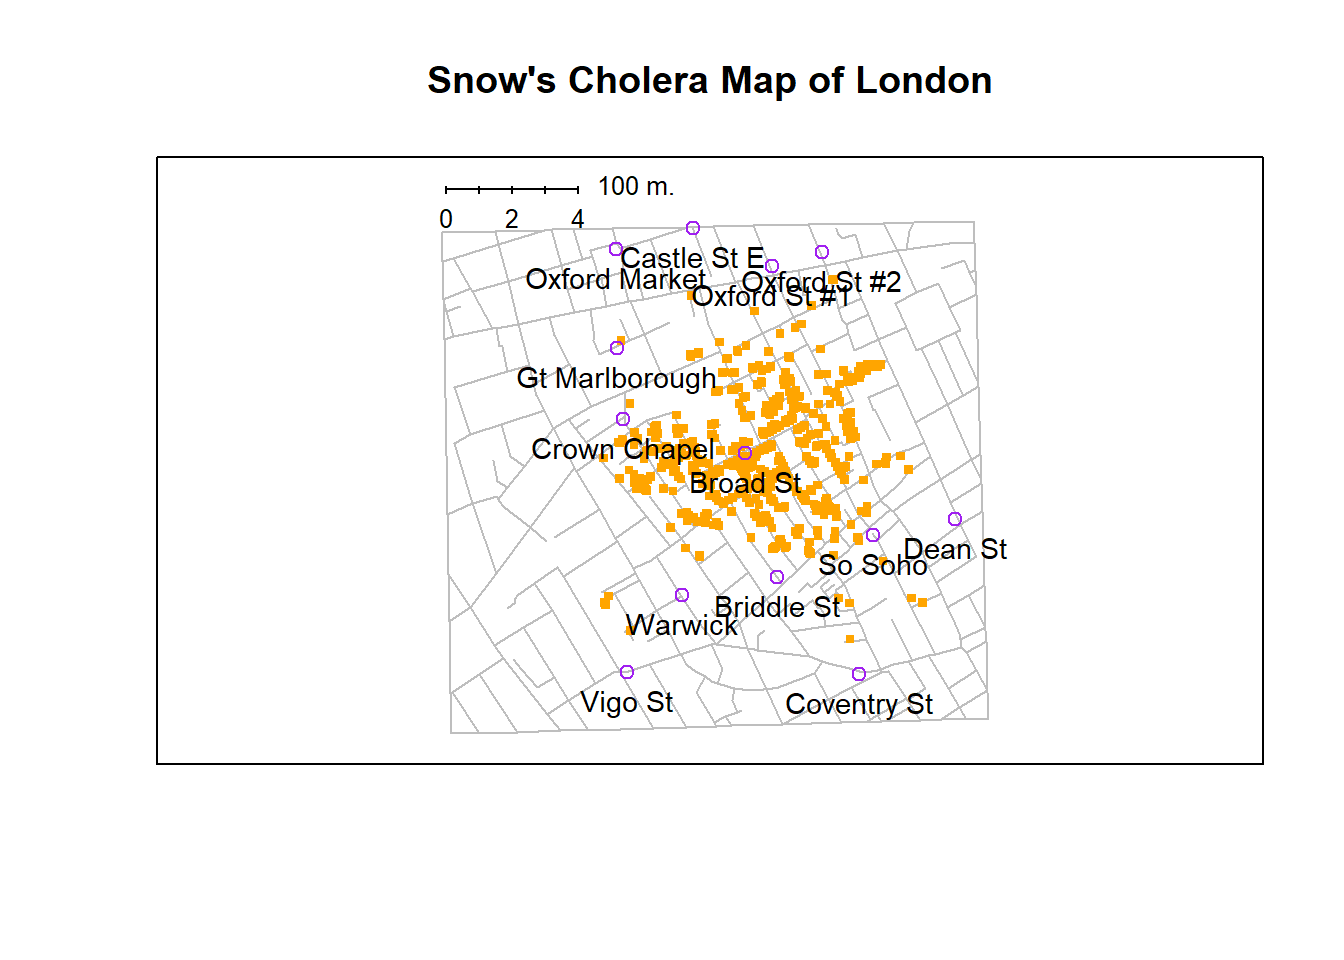 A stylised redrawing of John Snow's original cholera map. Each small dot represents the location of a cholera case, and each large circle shows the location of a well. As the plot makes clear, the cholera outbreak is centred very closely on the Broad St pump. This image uses the data from the `HistData` package, and was drawn using minor alterations to the commands provided in the help files. Note that Snow's original hand drawn map used different symbols and labels, but you get the idea.